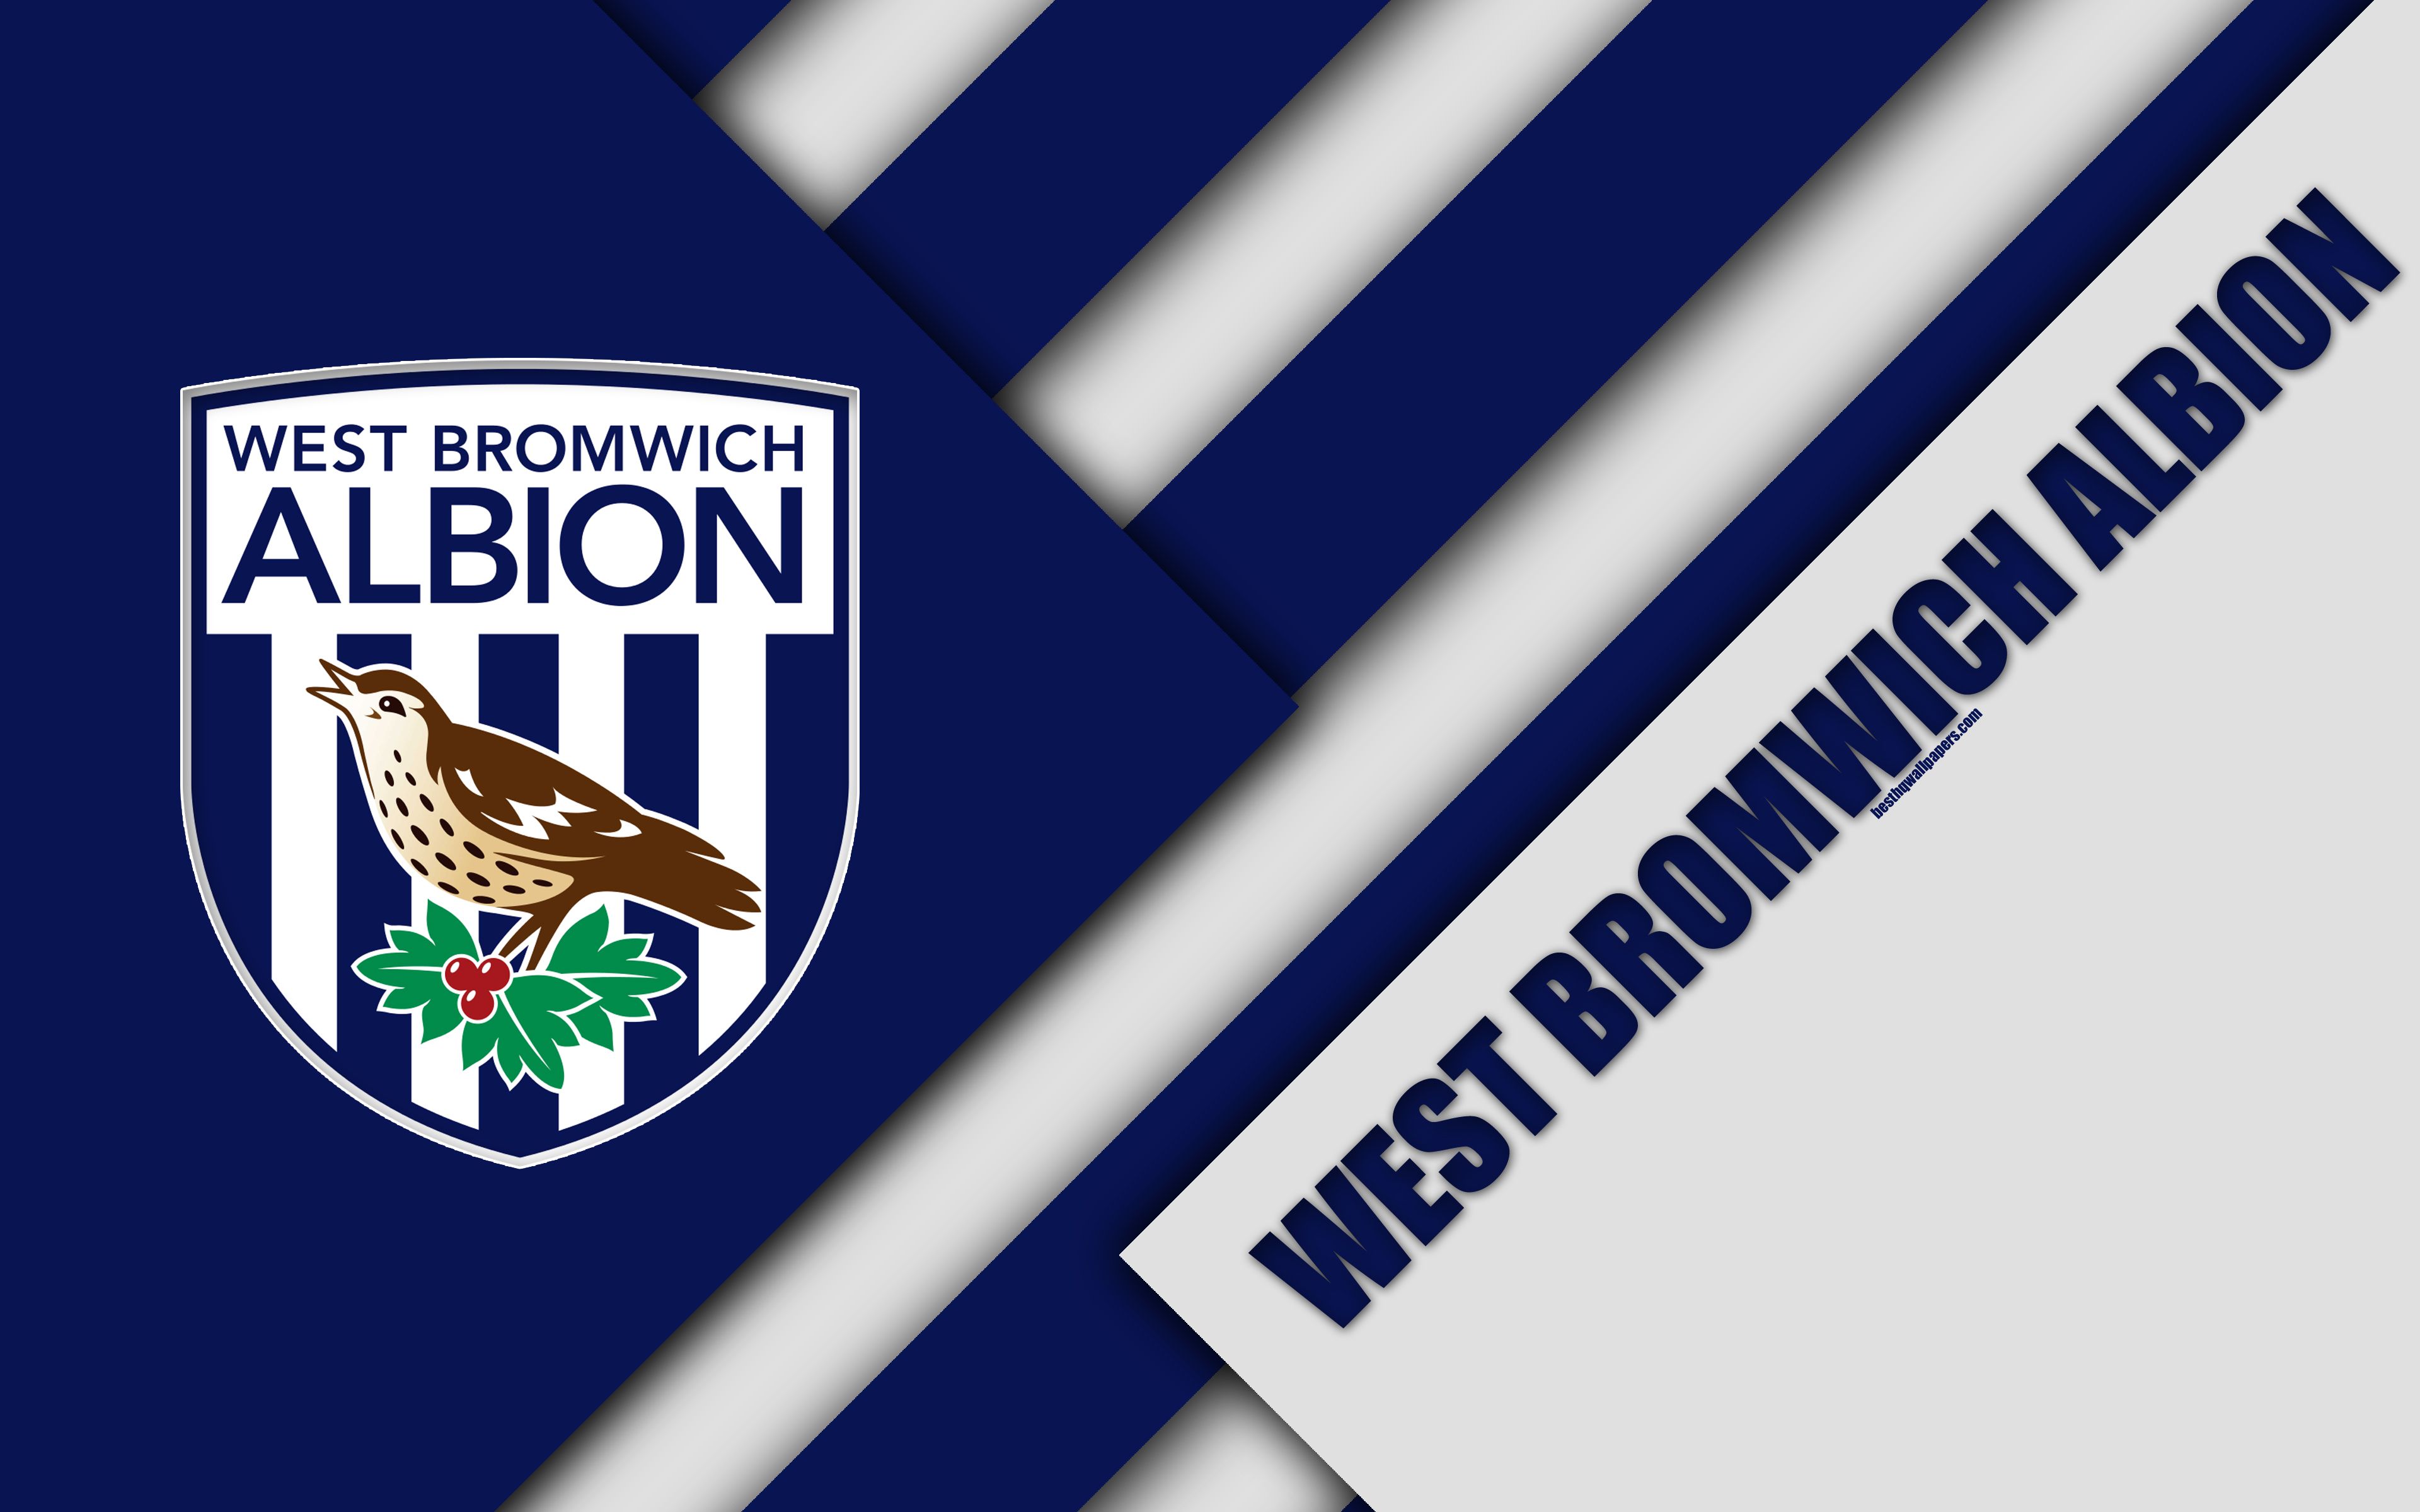 Download wallpaper West Bromwich Albion FC, logo, 4k, material design, blue white abstraction, football, West Bromwich, England, UK, Premier League, English football club for desktop with resolution 3840x2400. High Quality HD picture